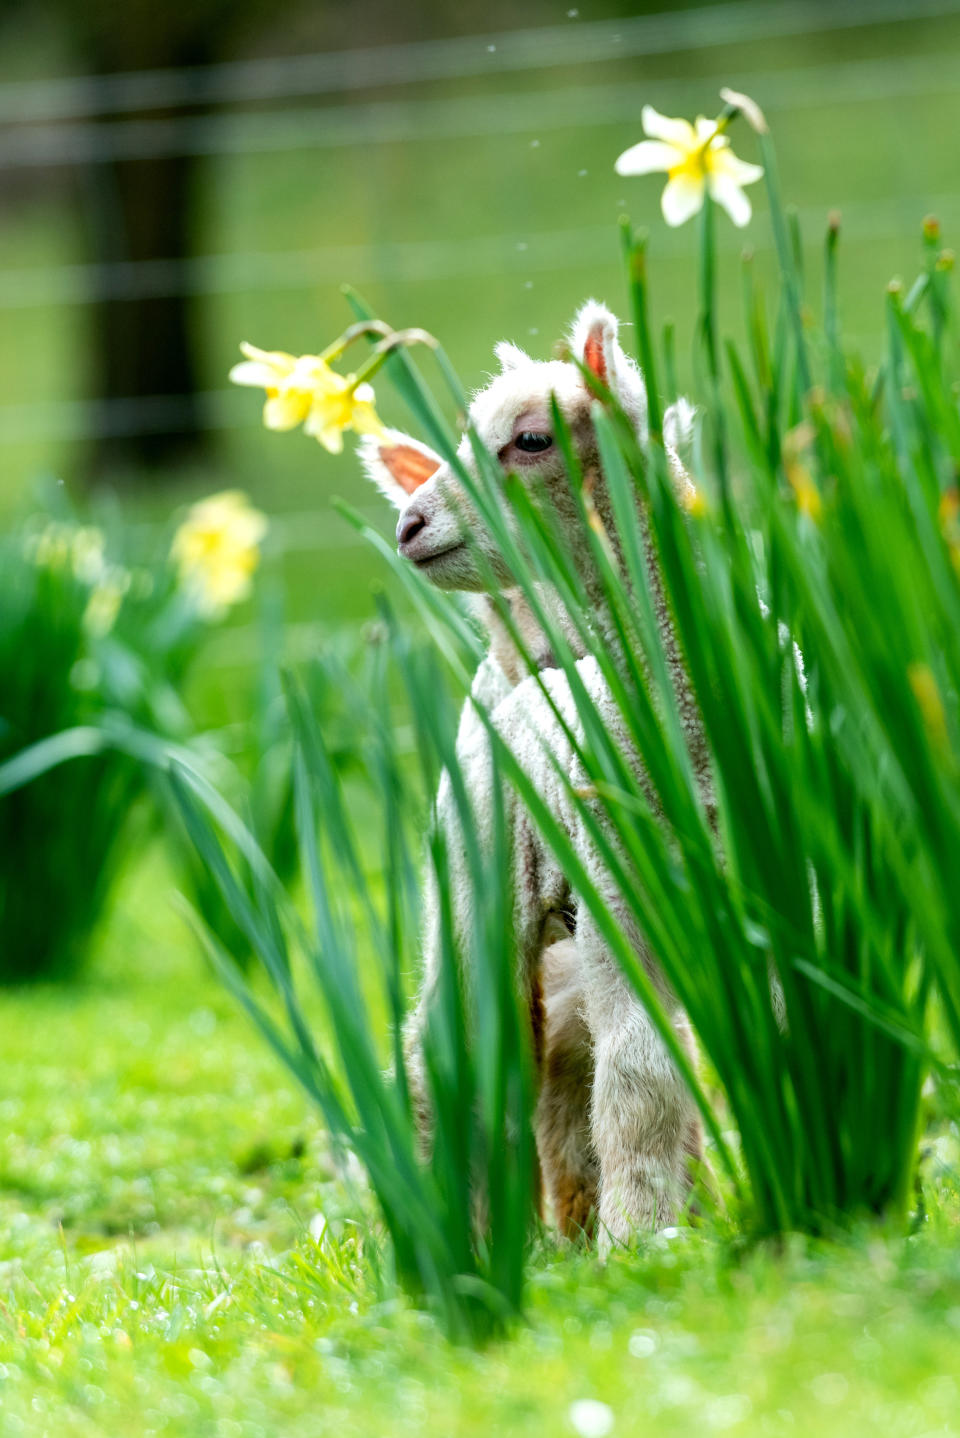 Taking time to smell the flowers. (Photo: Andrew Hasson via Getty Images)